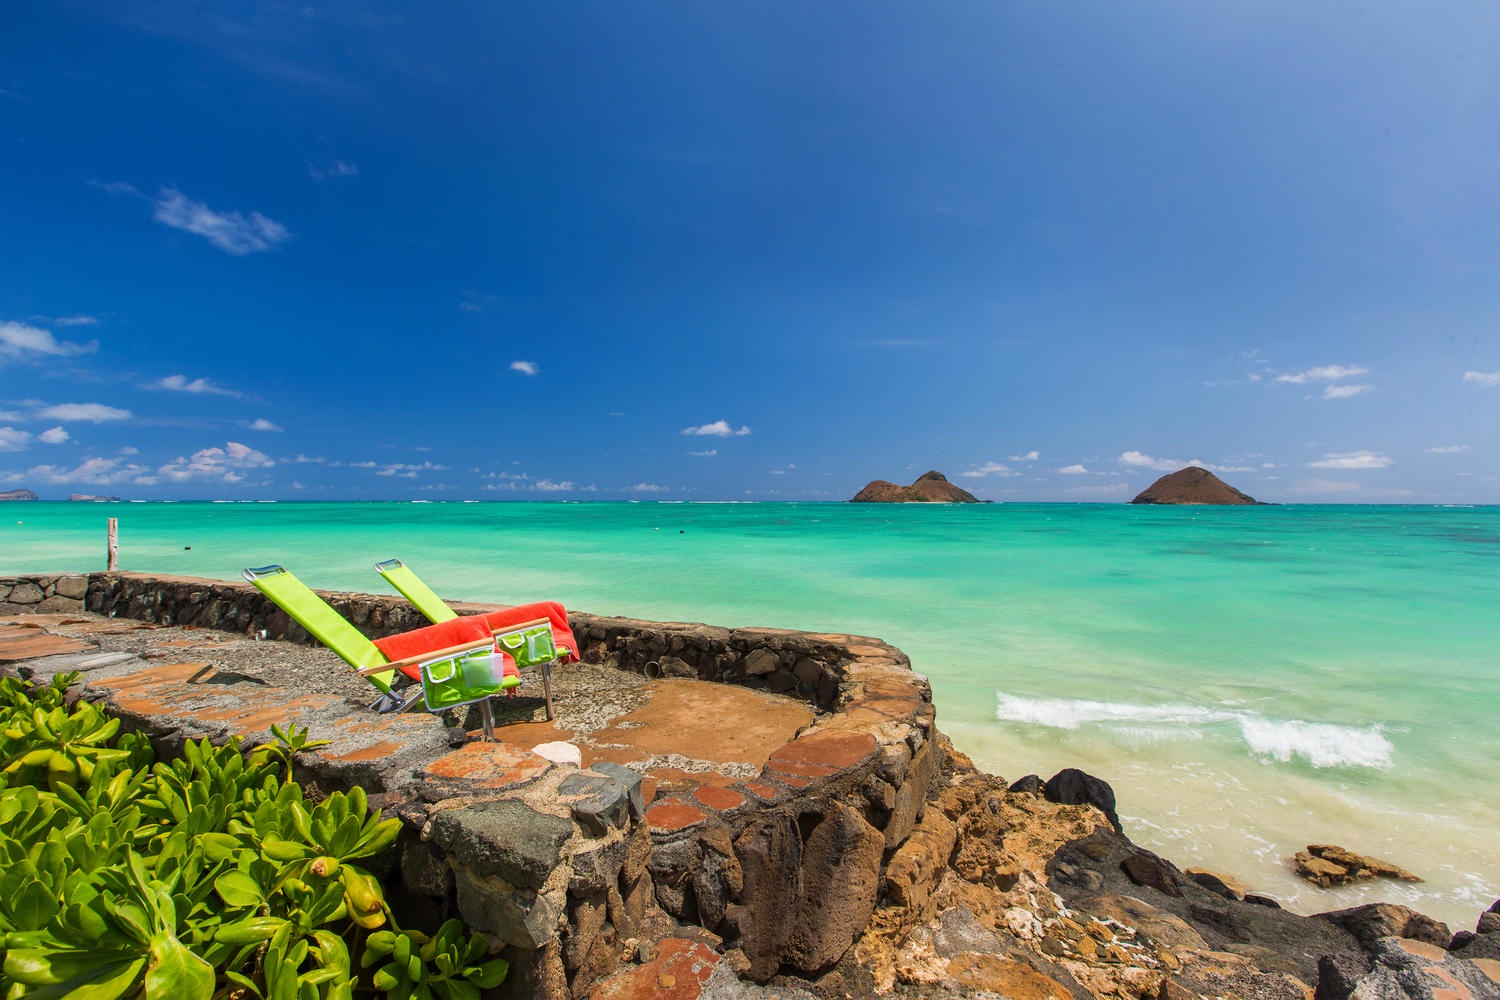 Kailua Vacation Rentals, Lanikai Oceanside 5 Bedroom - Set your beach chairs on the oceanfront seal wall and watch the tides come and go.